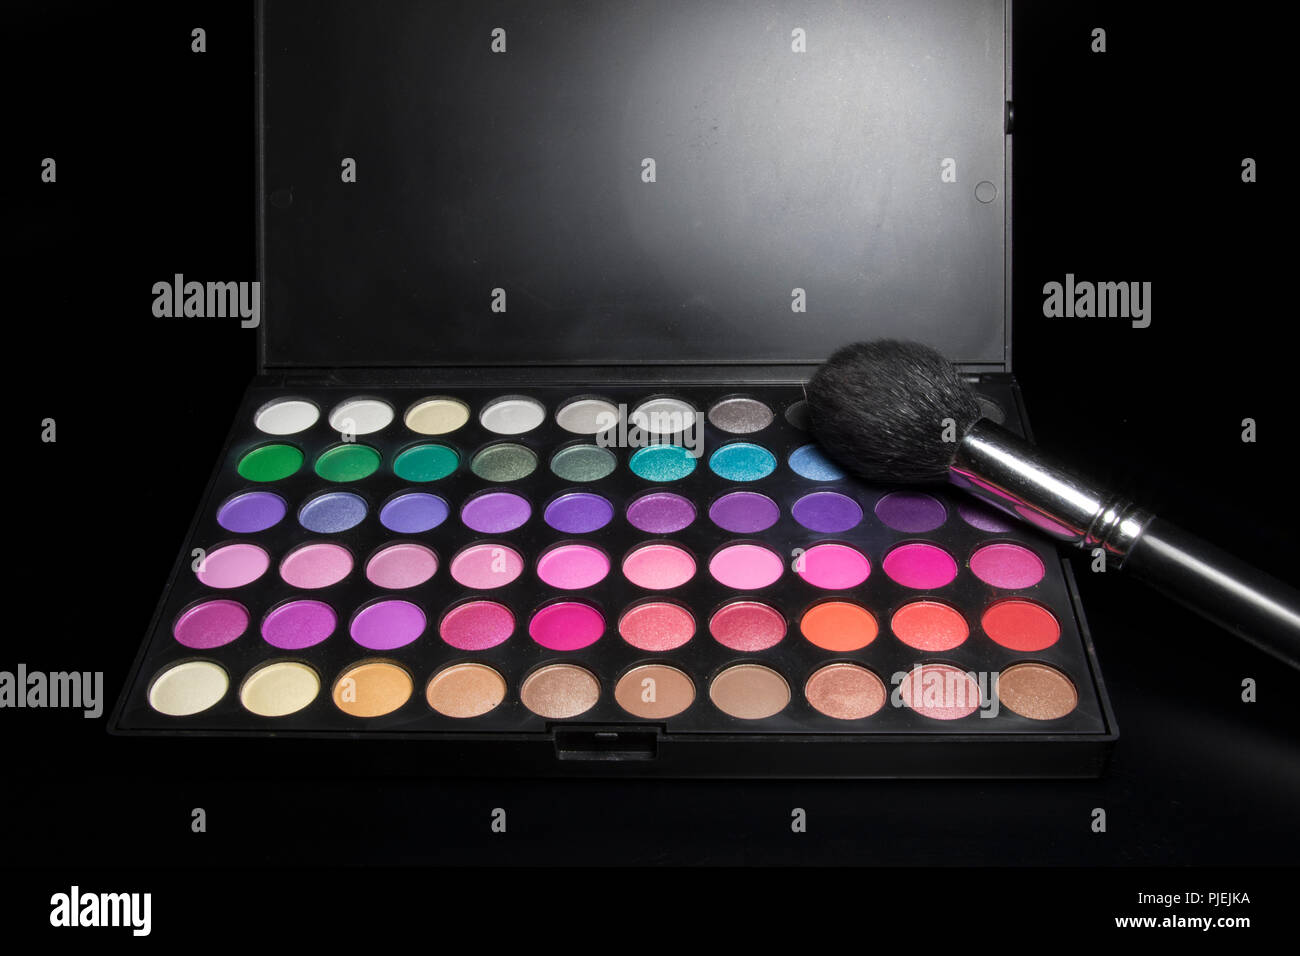 Eye shadows and make up brush on black background. Make up kit from a female beauty industry professional. Stock Photo